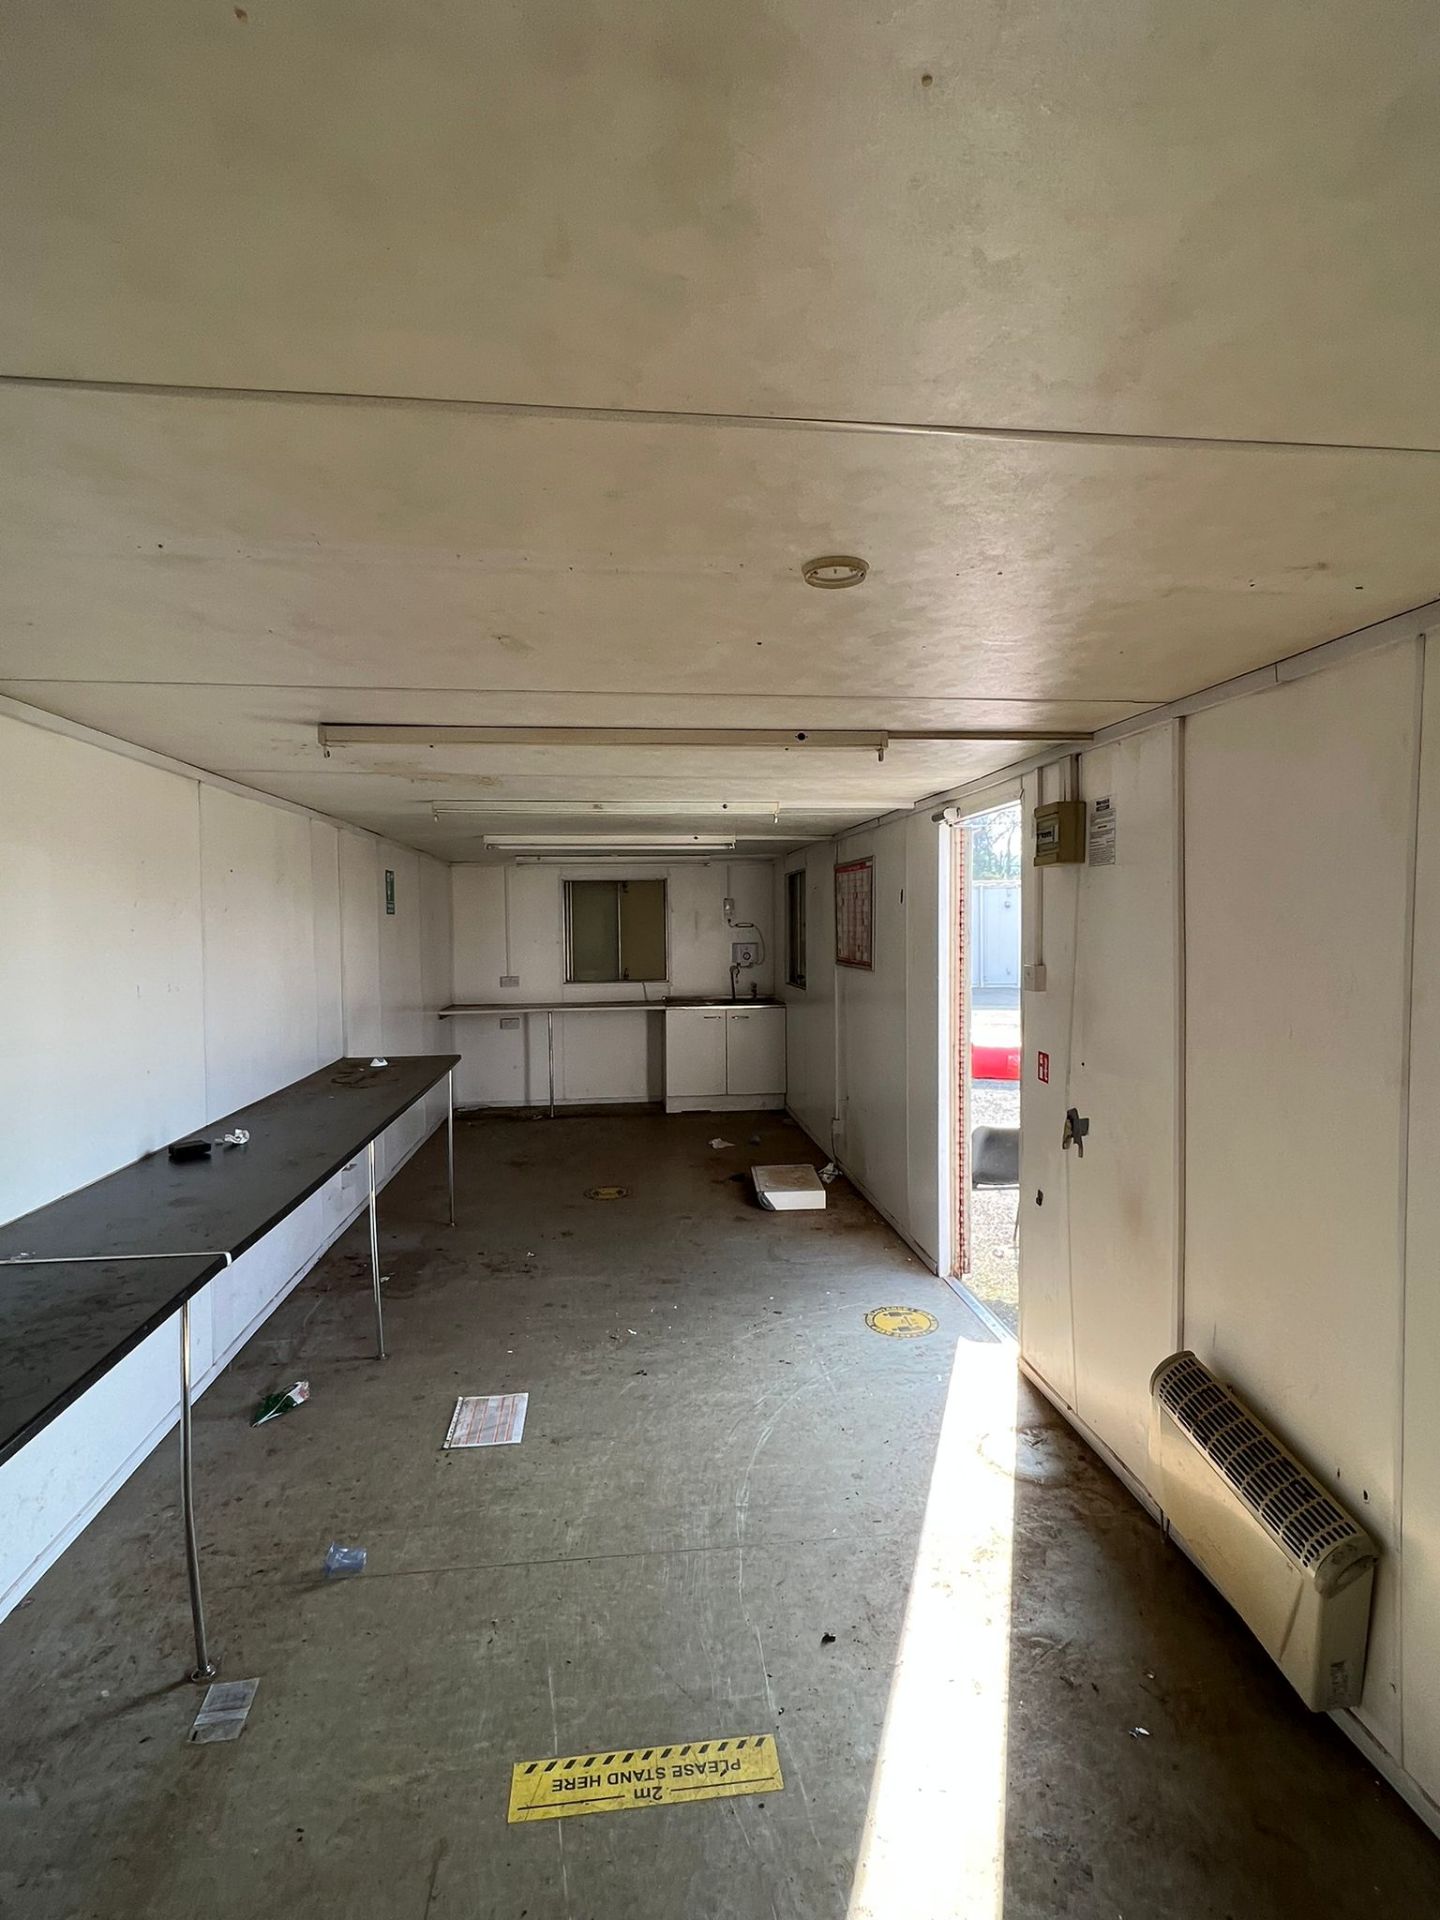 32ft anti vandal site office welfare unit canteen - Image 2 of 5